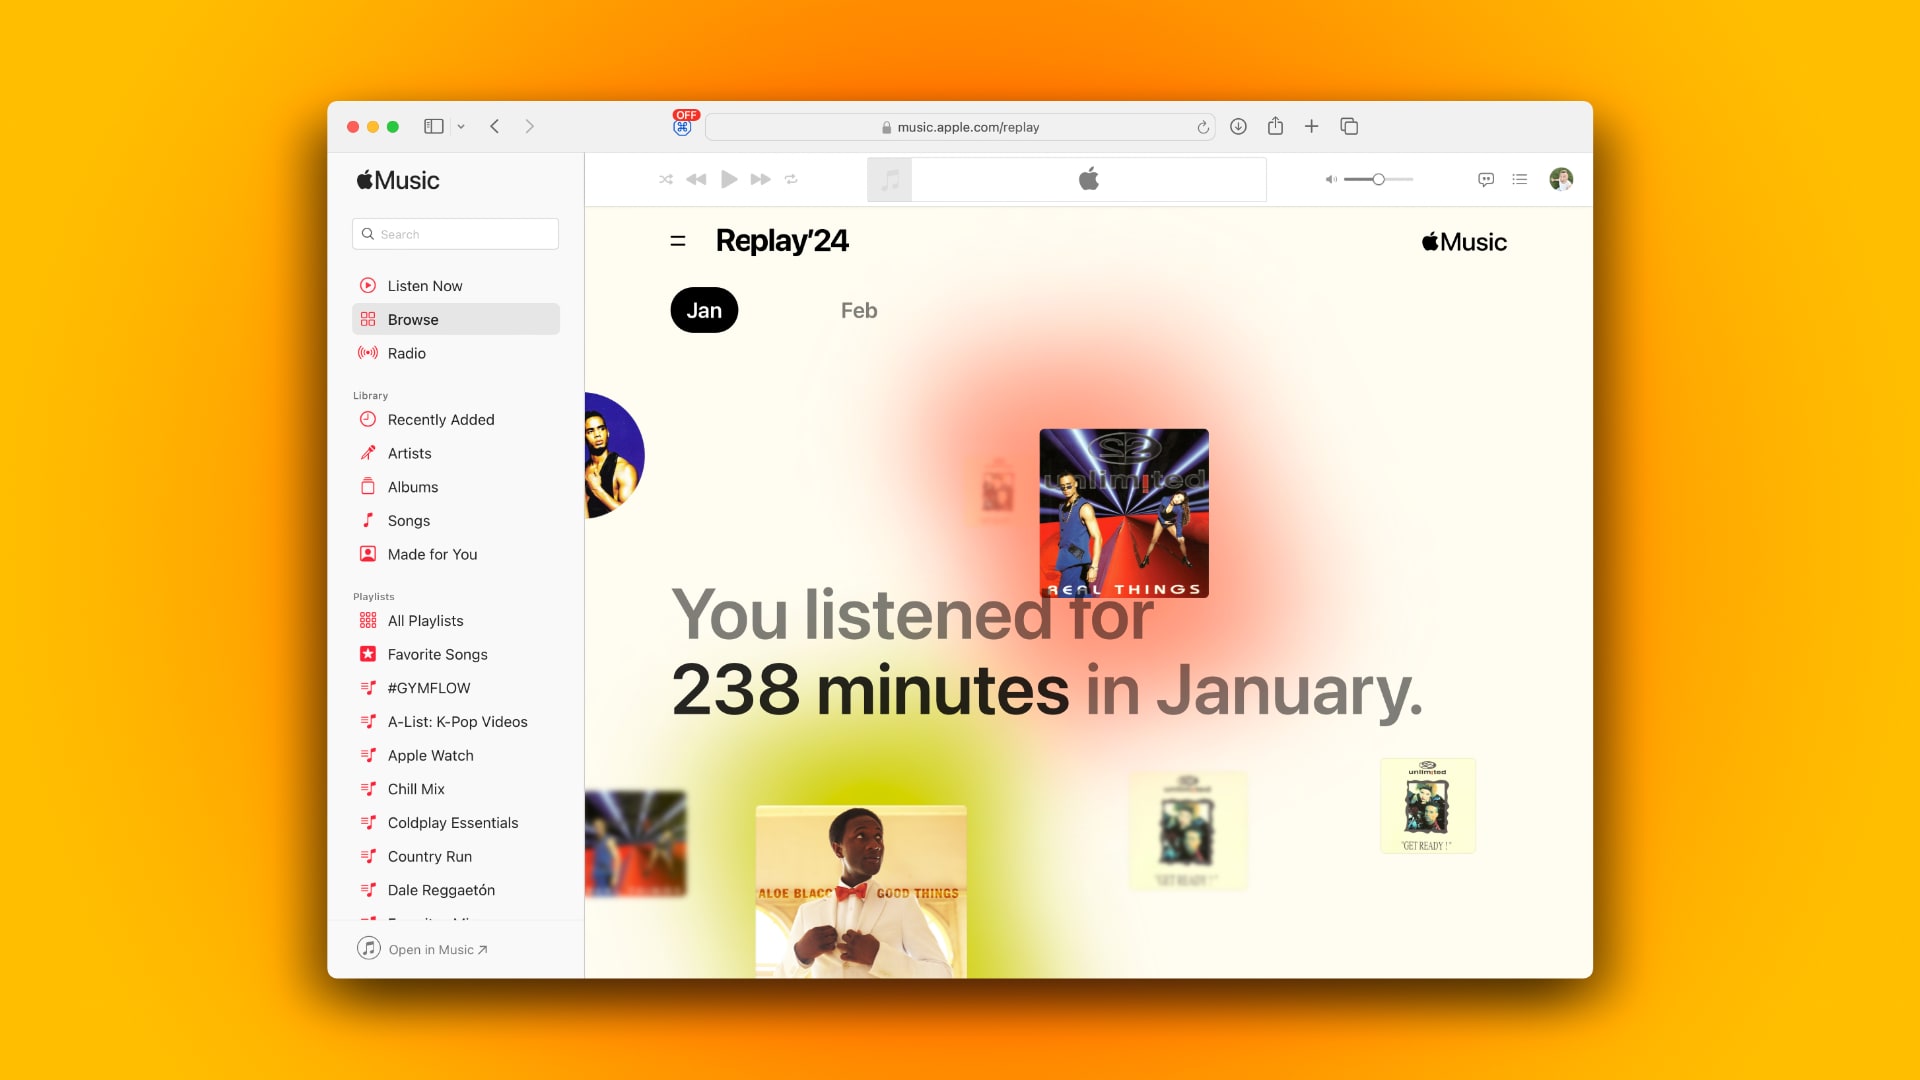 How to get your Apple Music Replay listening insights for a specific month